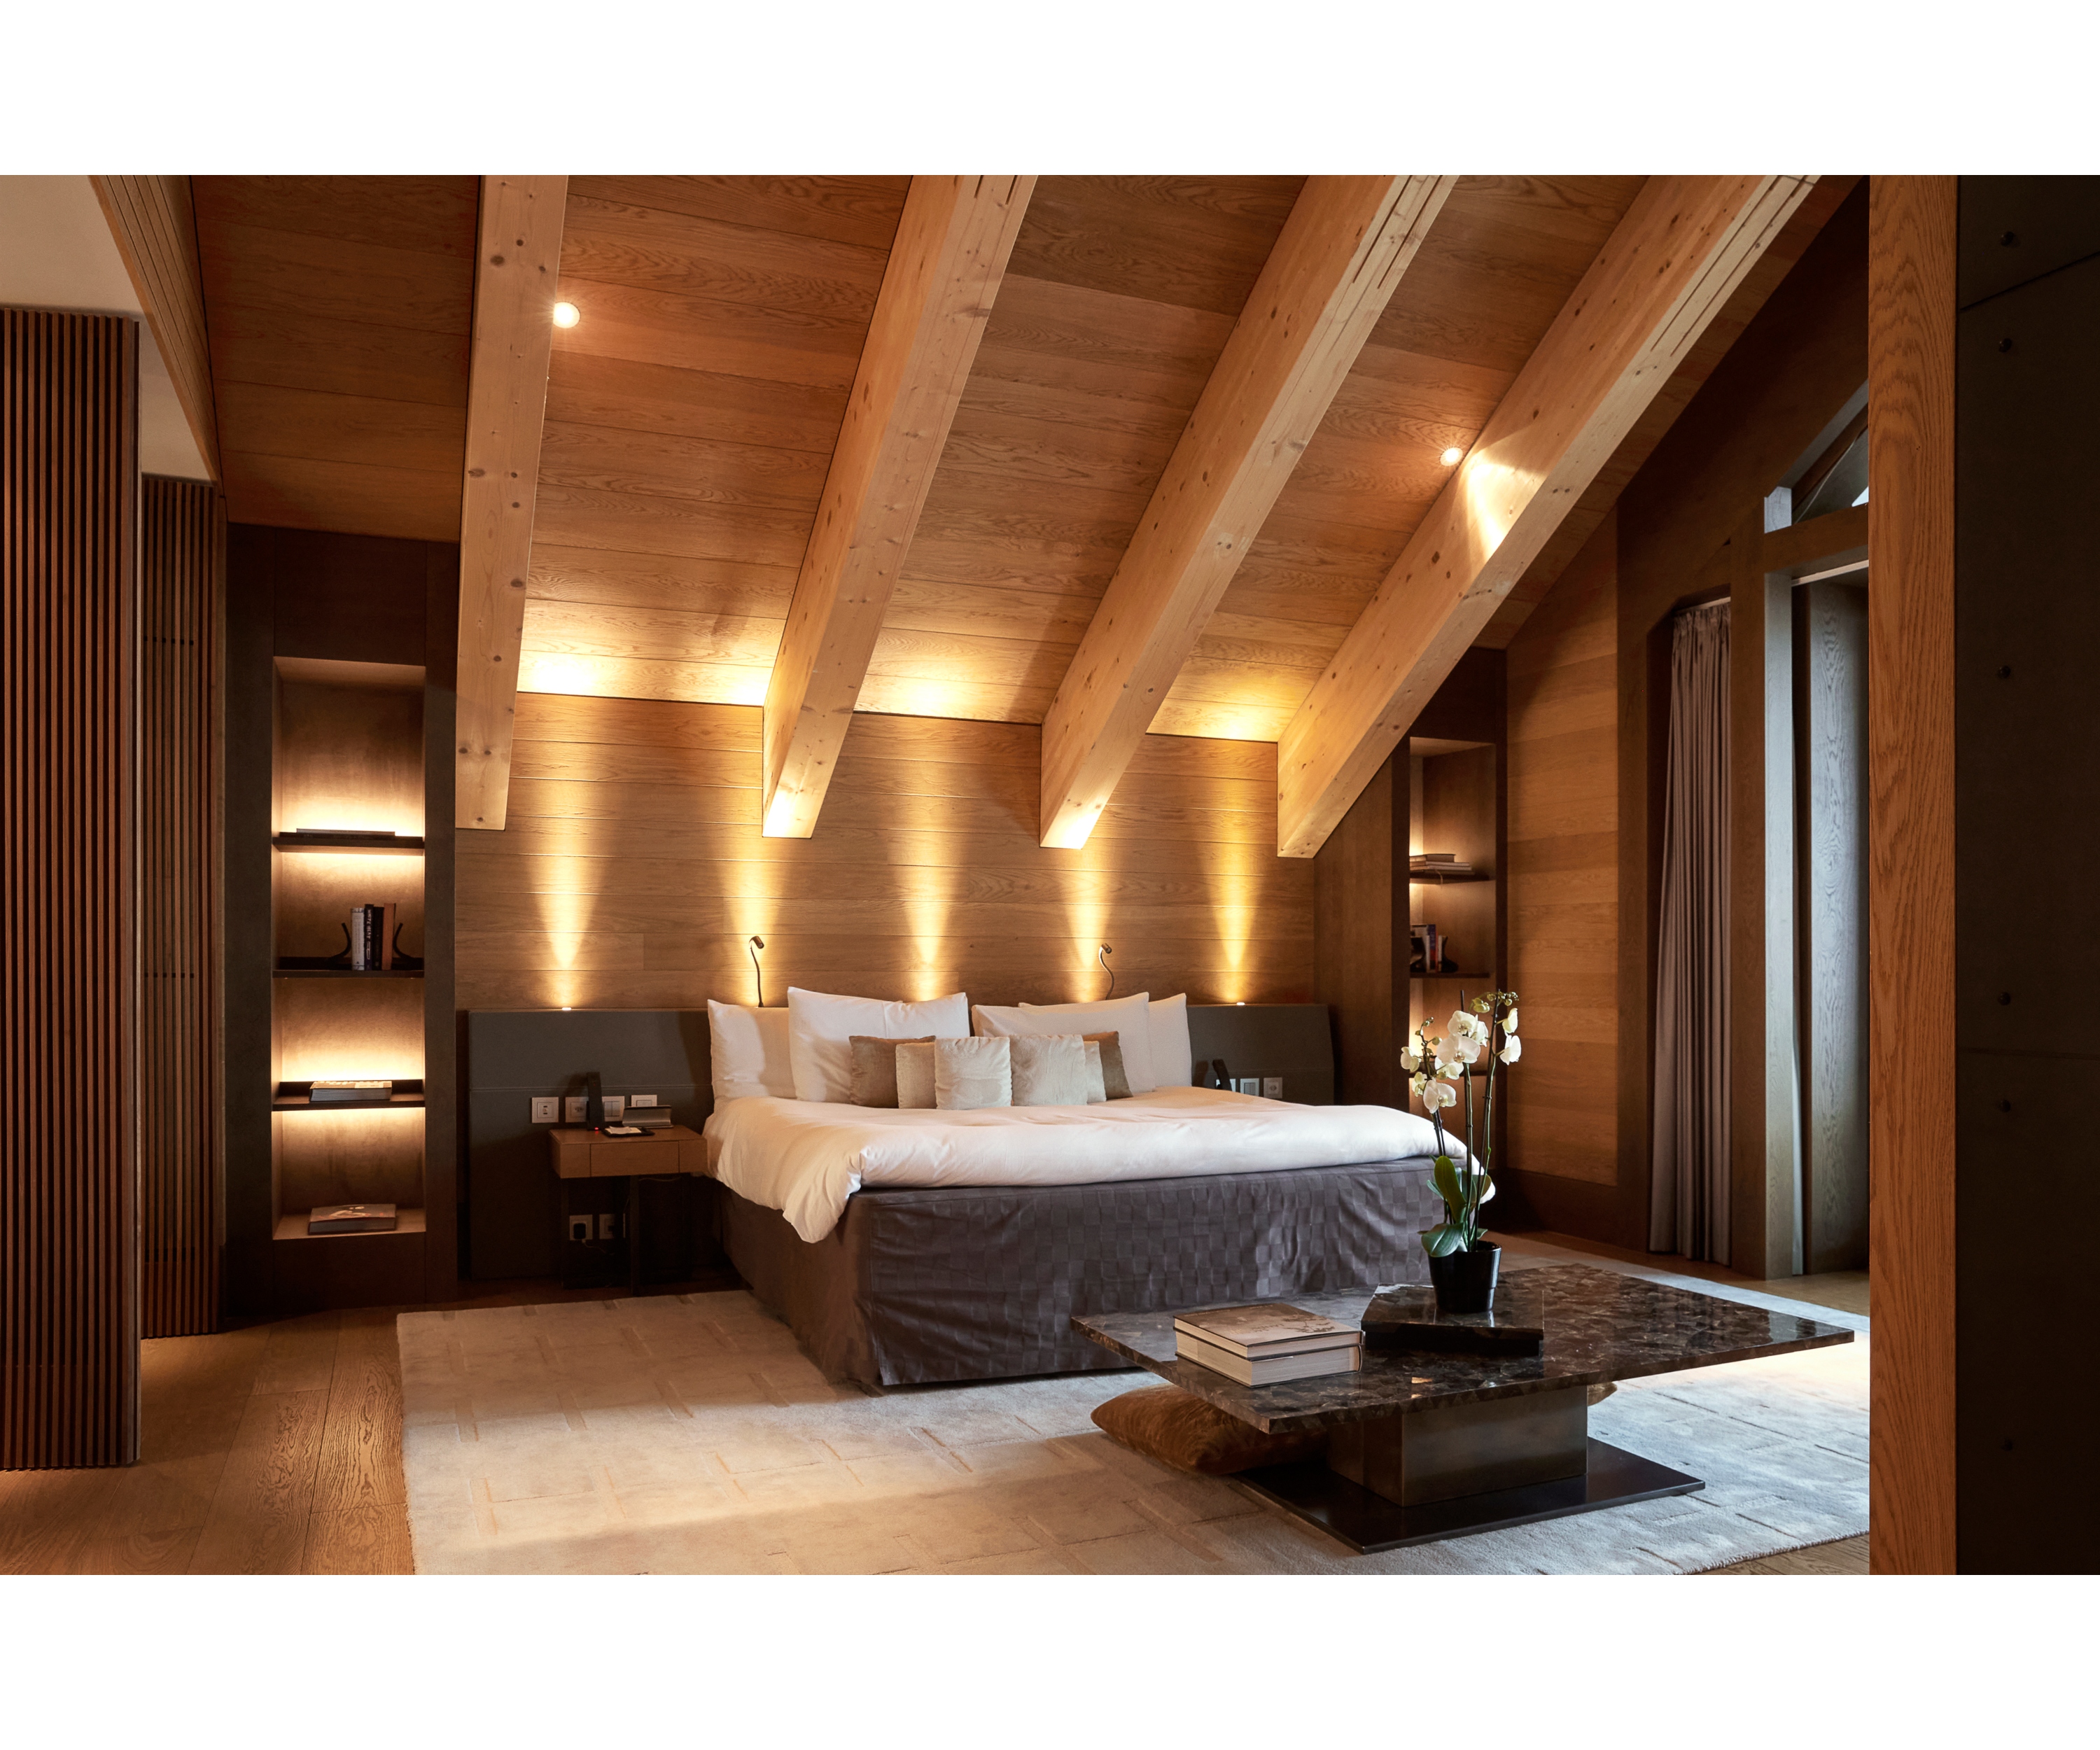 Modernly decorated bedroom at The Chedi Andermatt with generous living space under a high pitched roof with lots of indirect lighting.